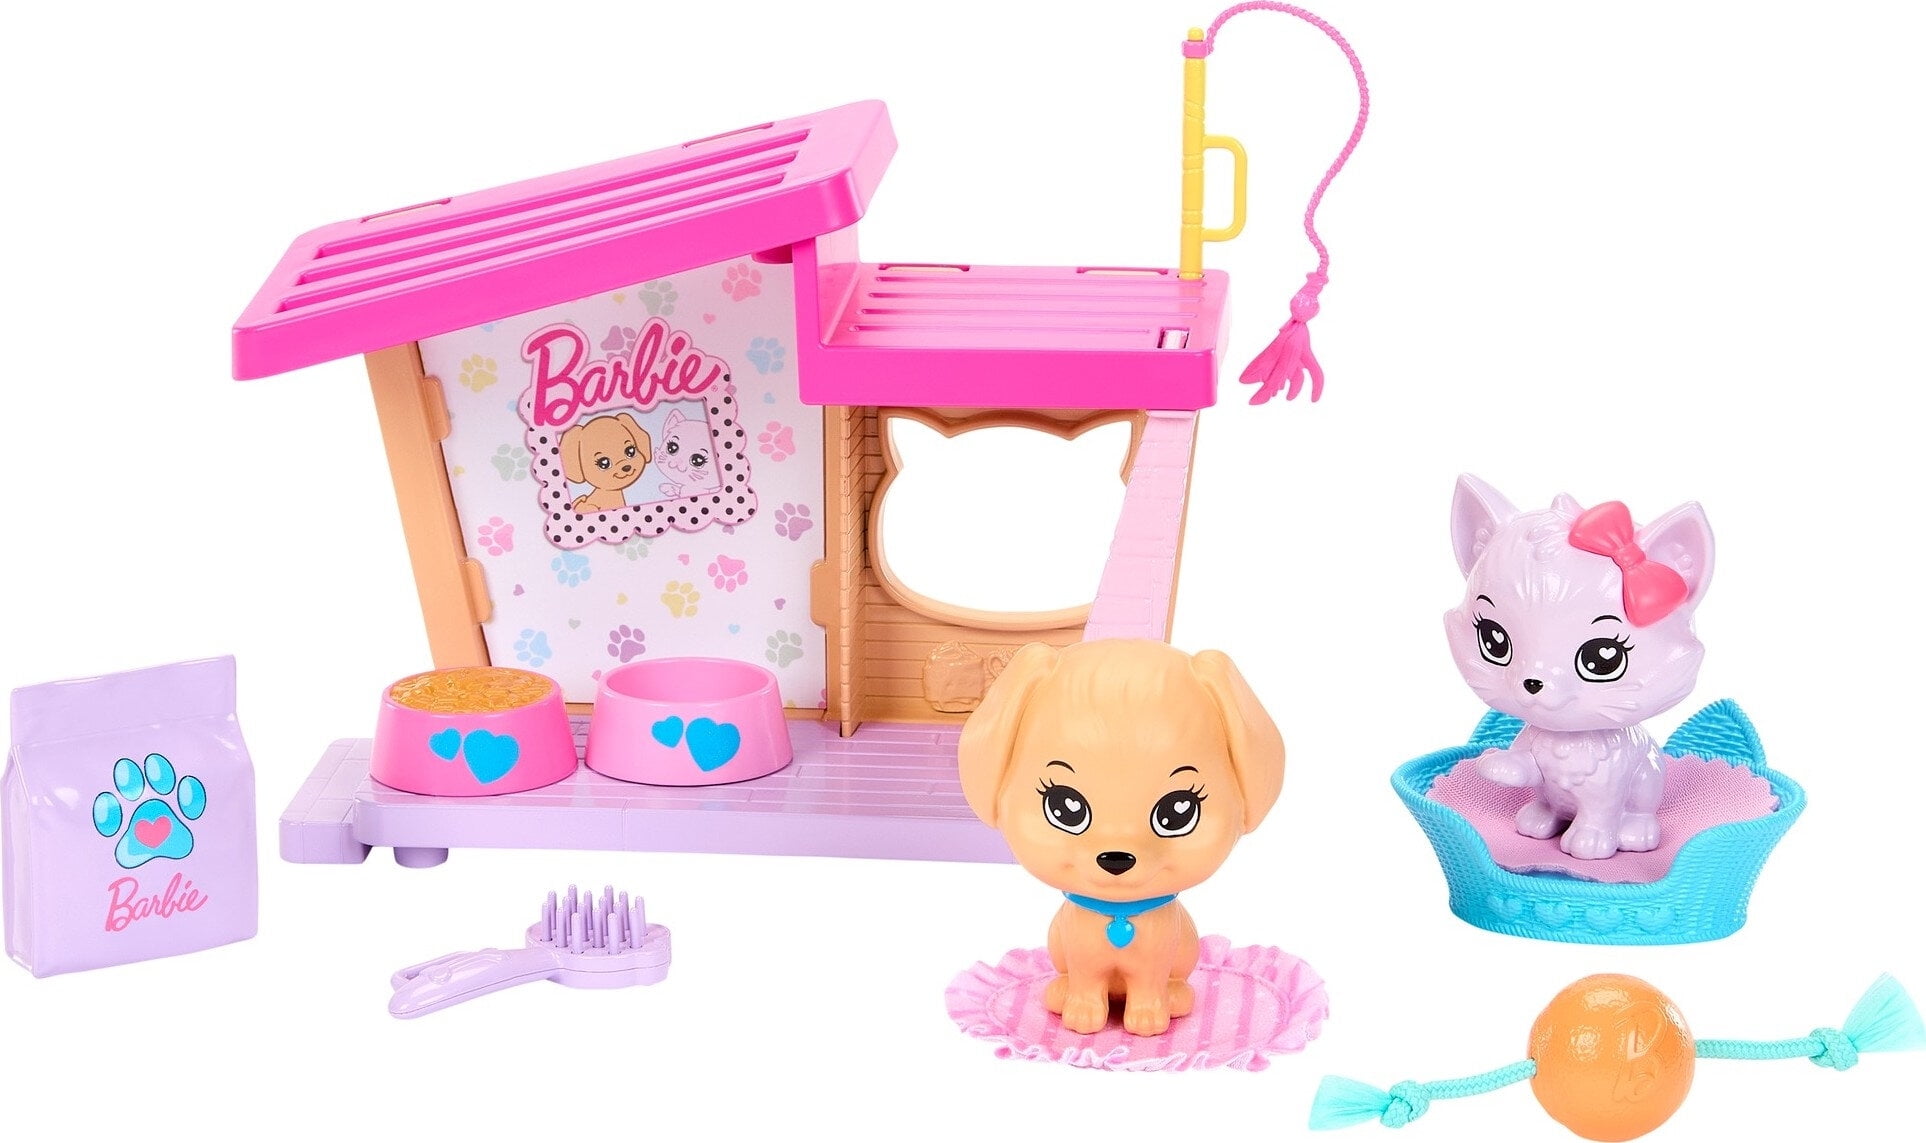 My First Barbie Pet Care Accessories for Preschool Dolls, Dog House with Dog & Cat, 13.5-inch Scale